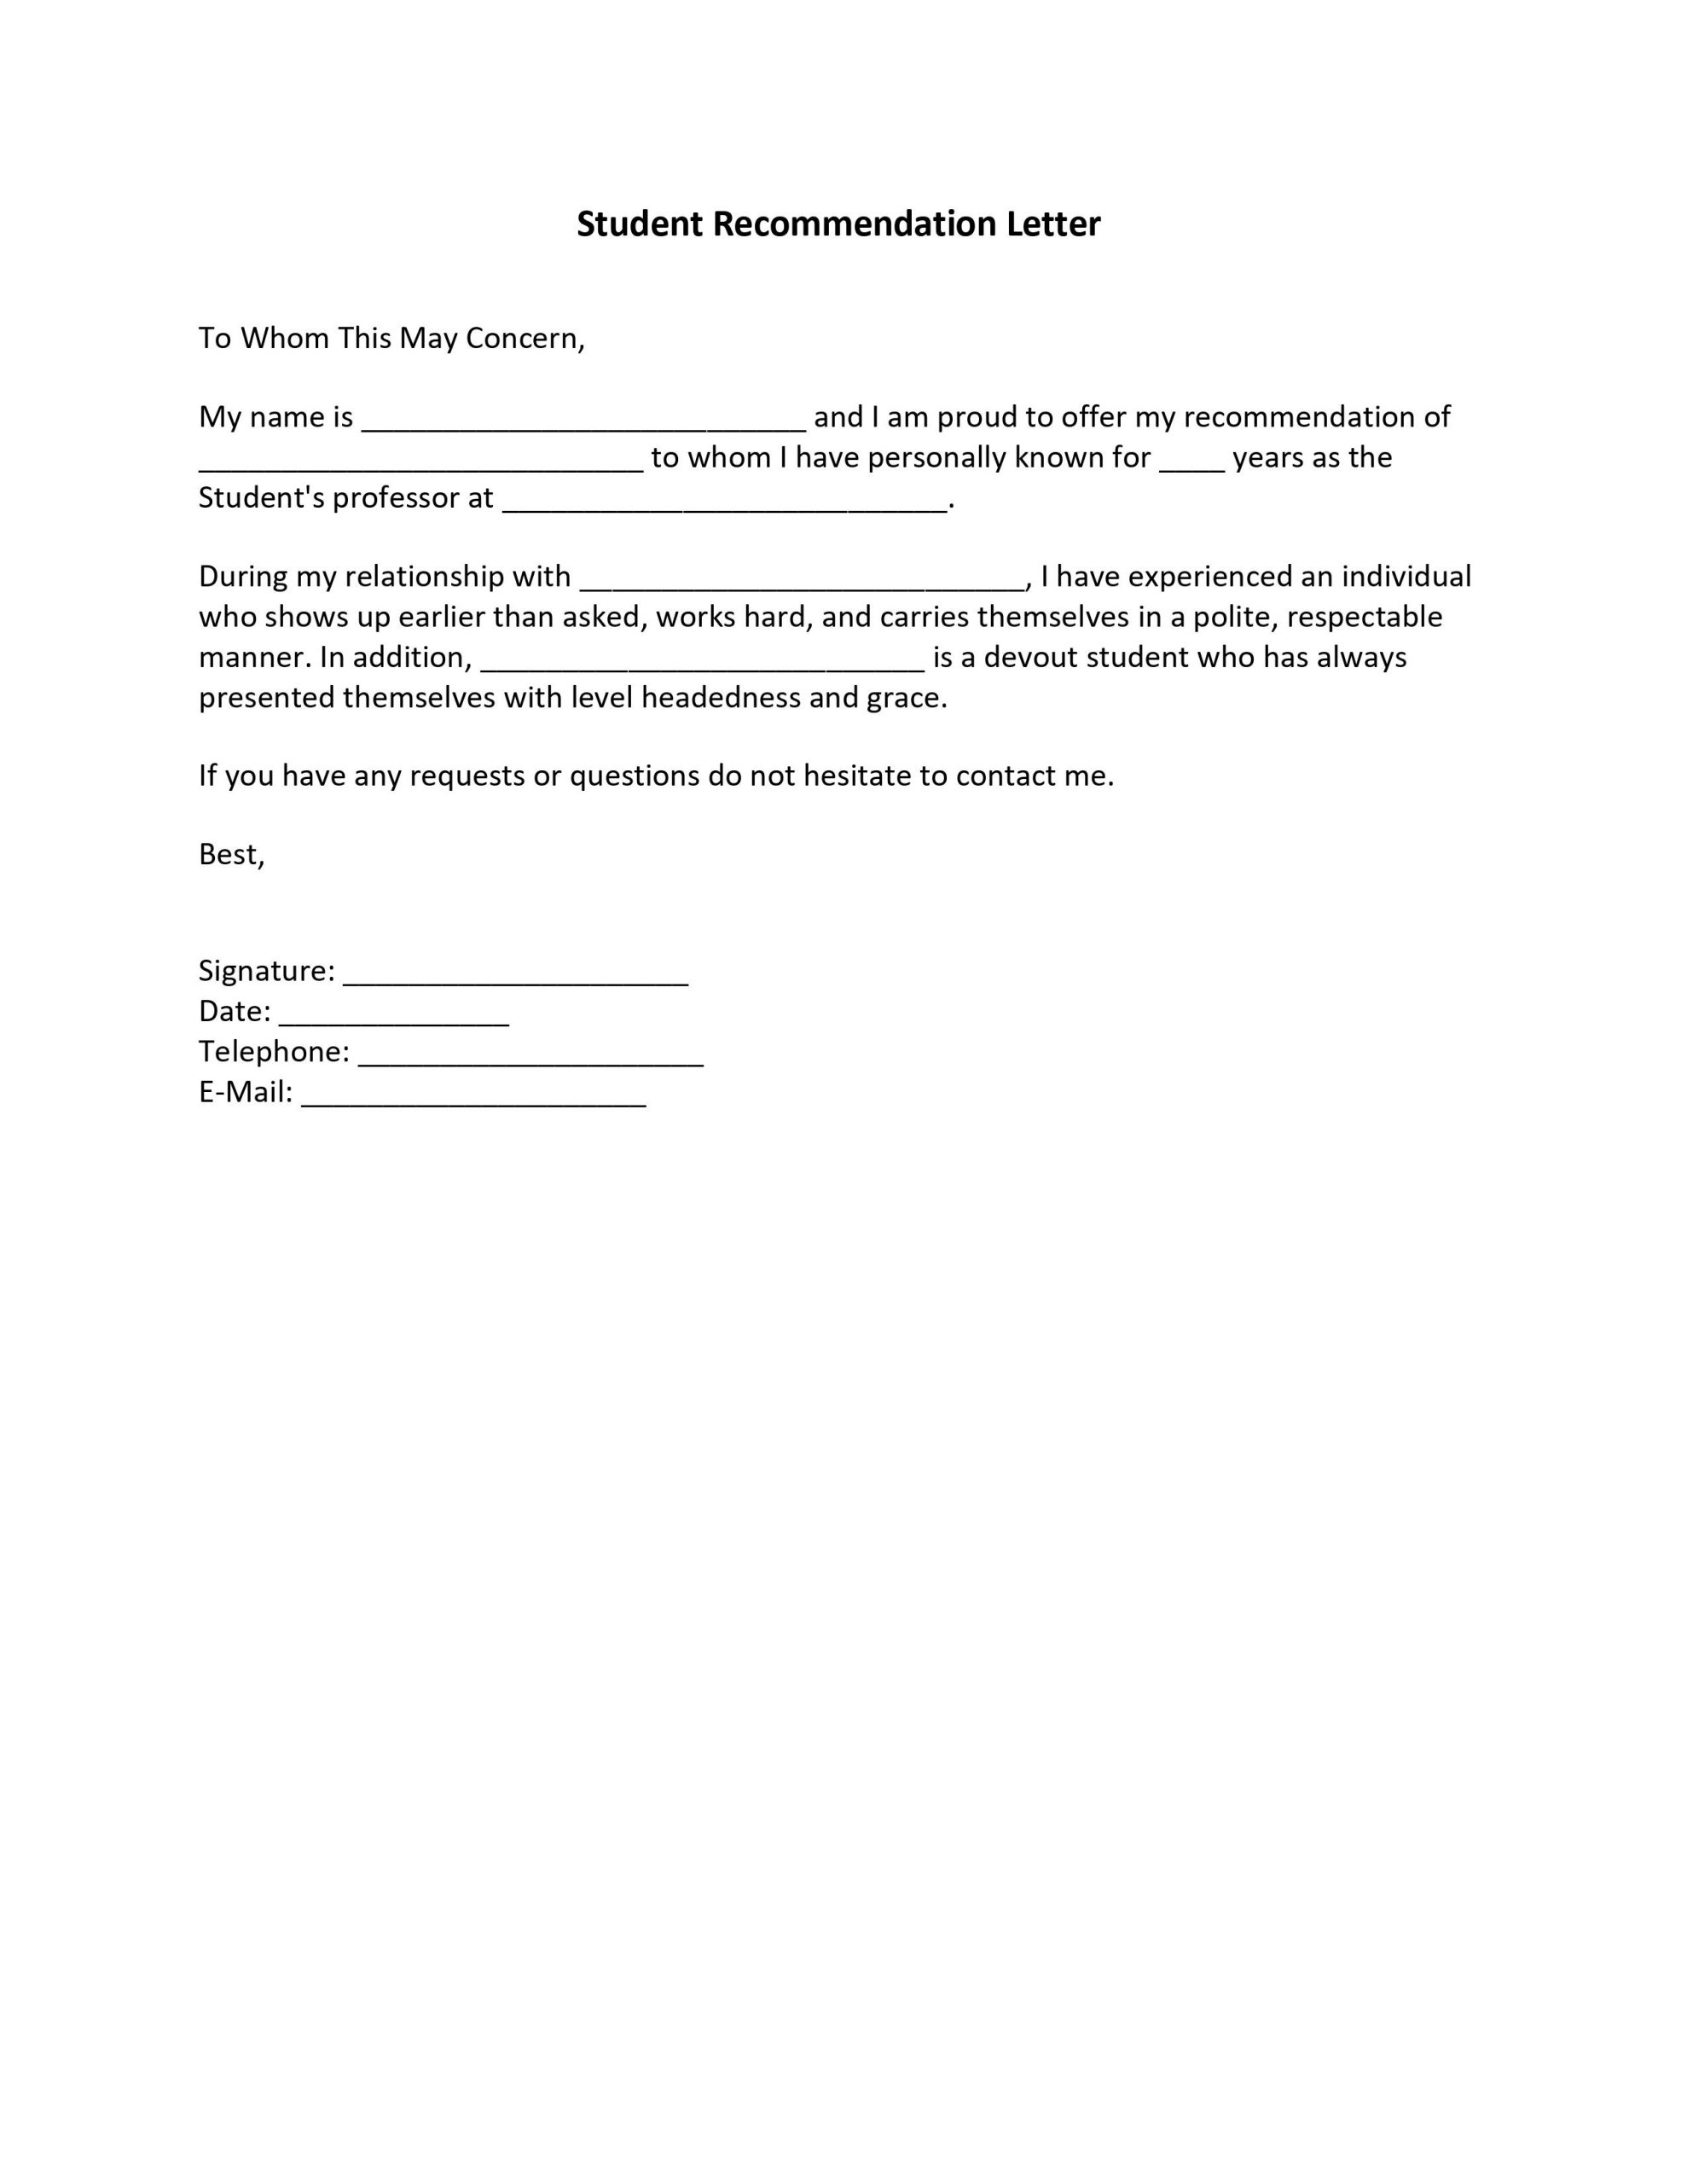 Student Recommendation Letter